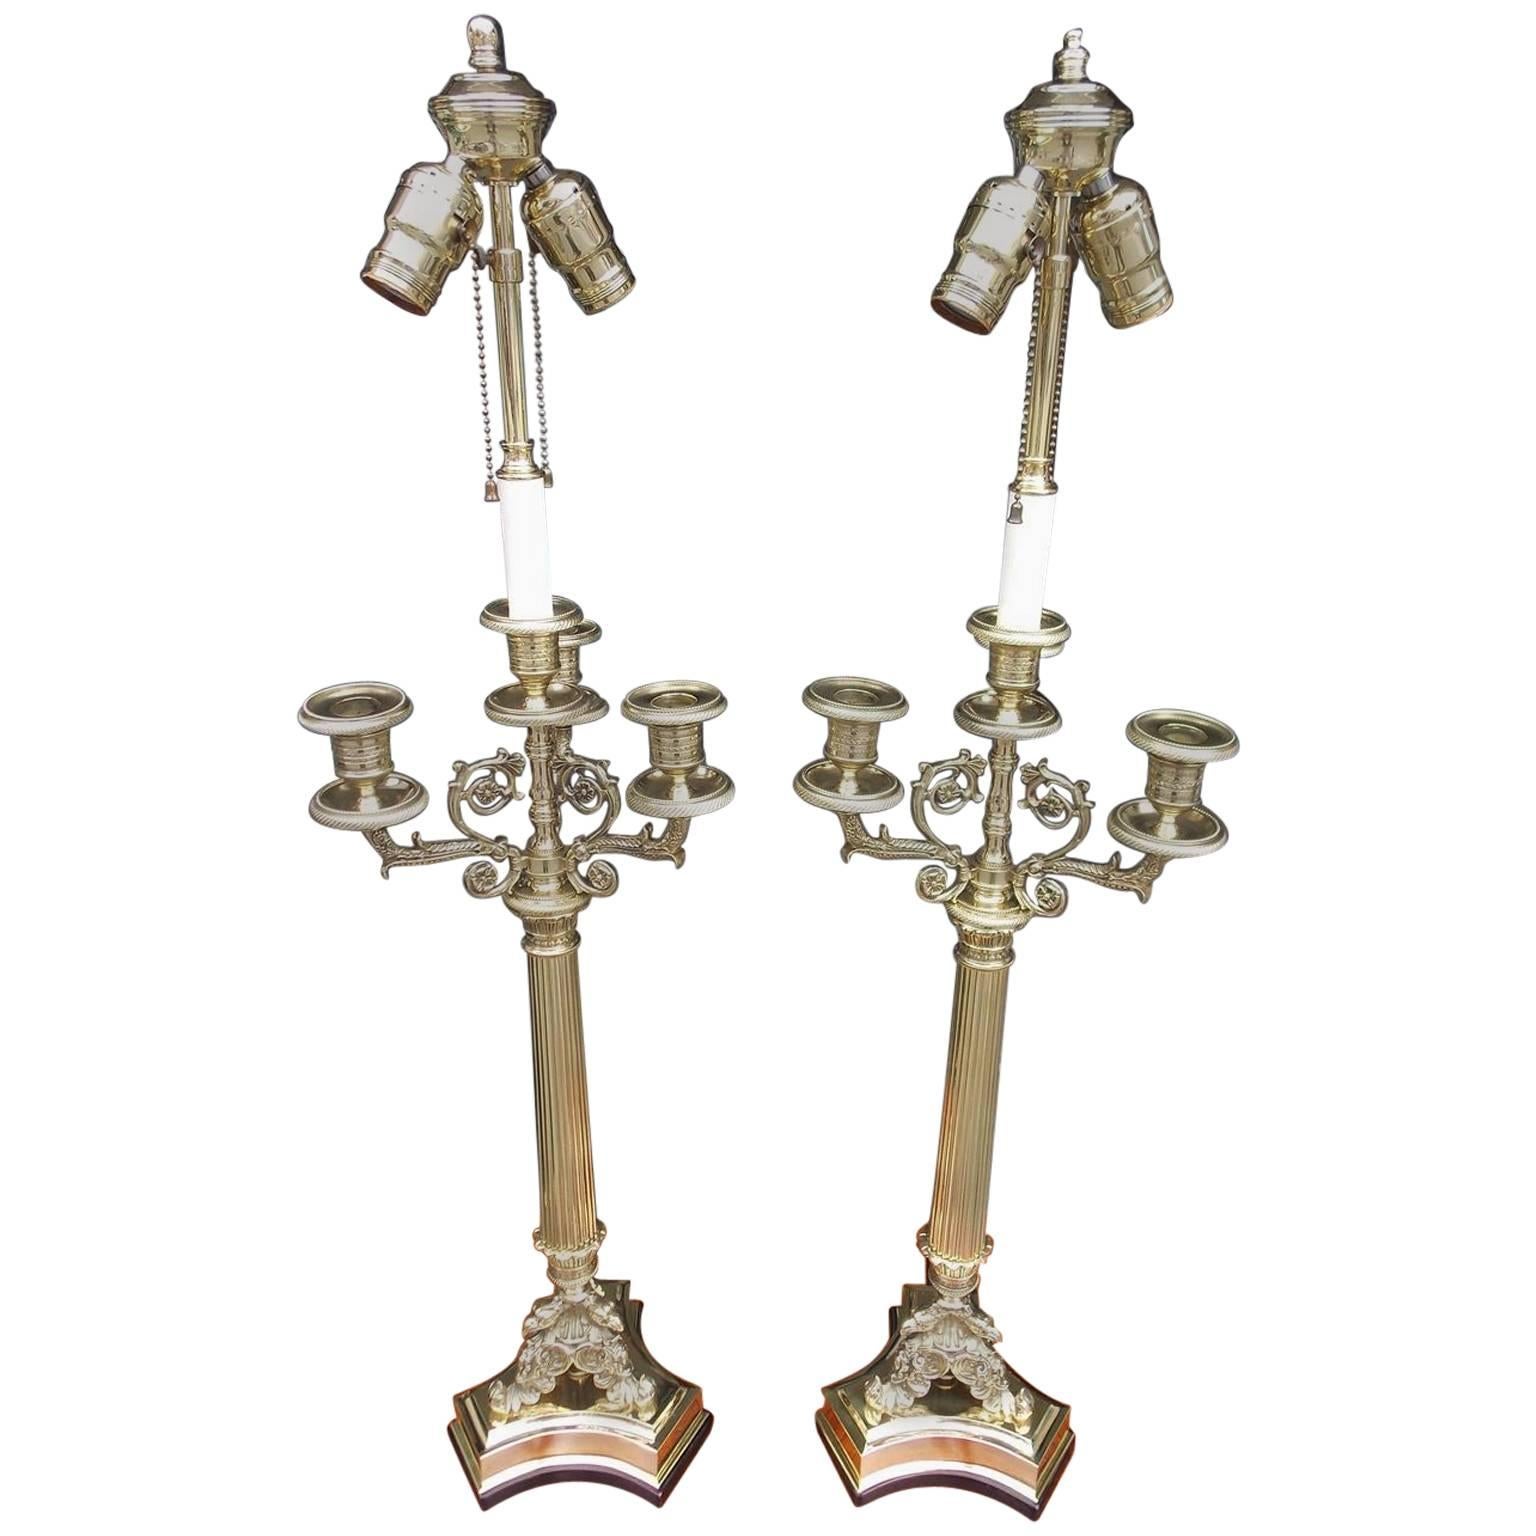 Pair of French Brass Candelabra Lamps with Eagle Acanthus Motif, Circa 1820 For Sale